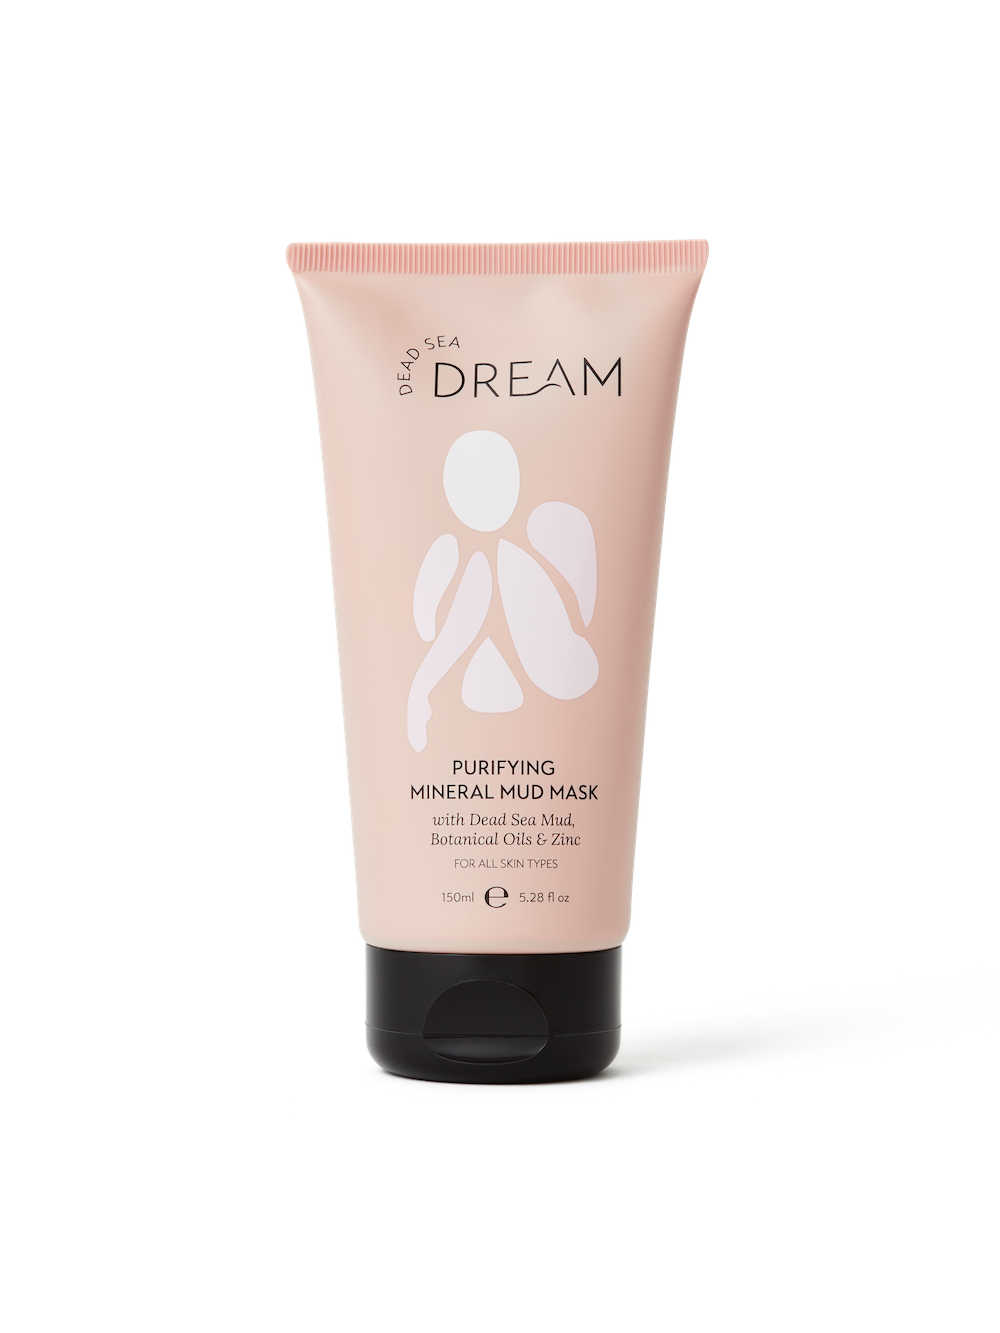 DEAD SEA DREAM  PURIFYING MINERAL MUD MASK